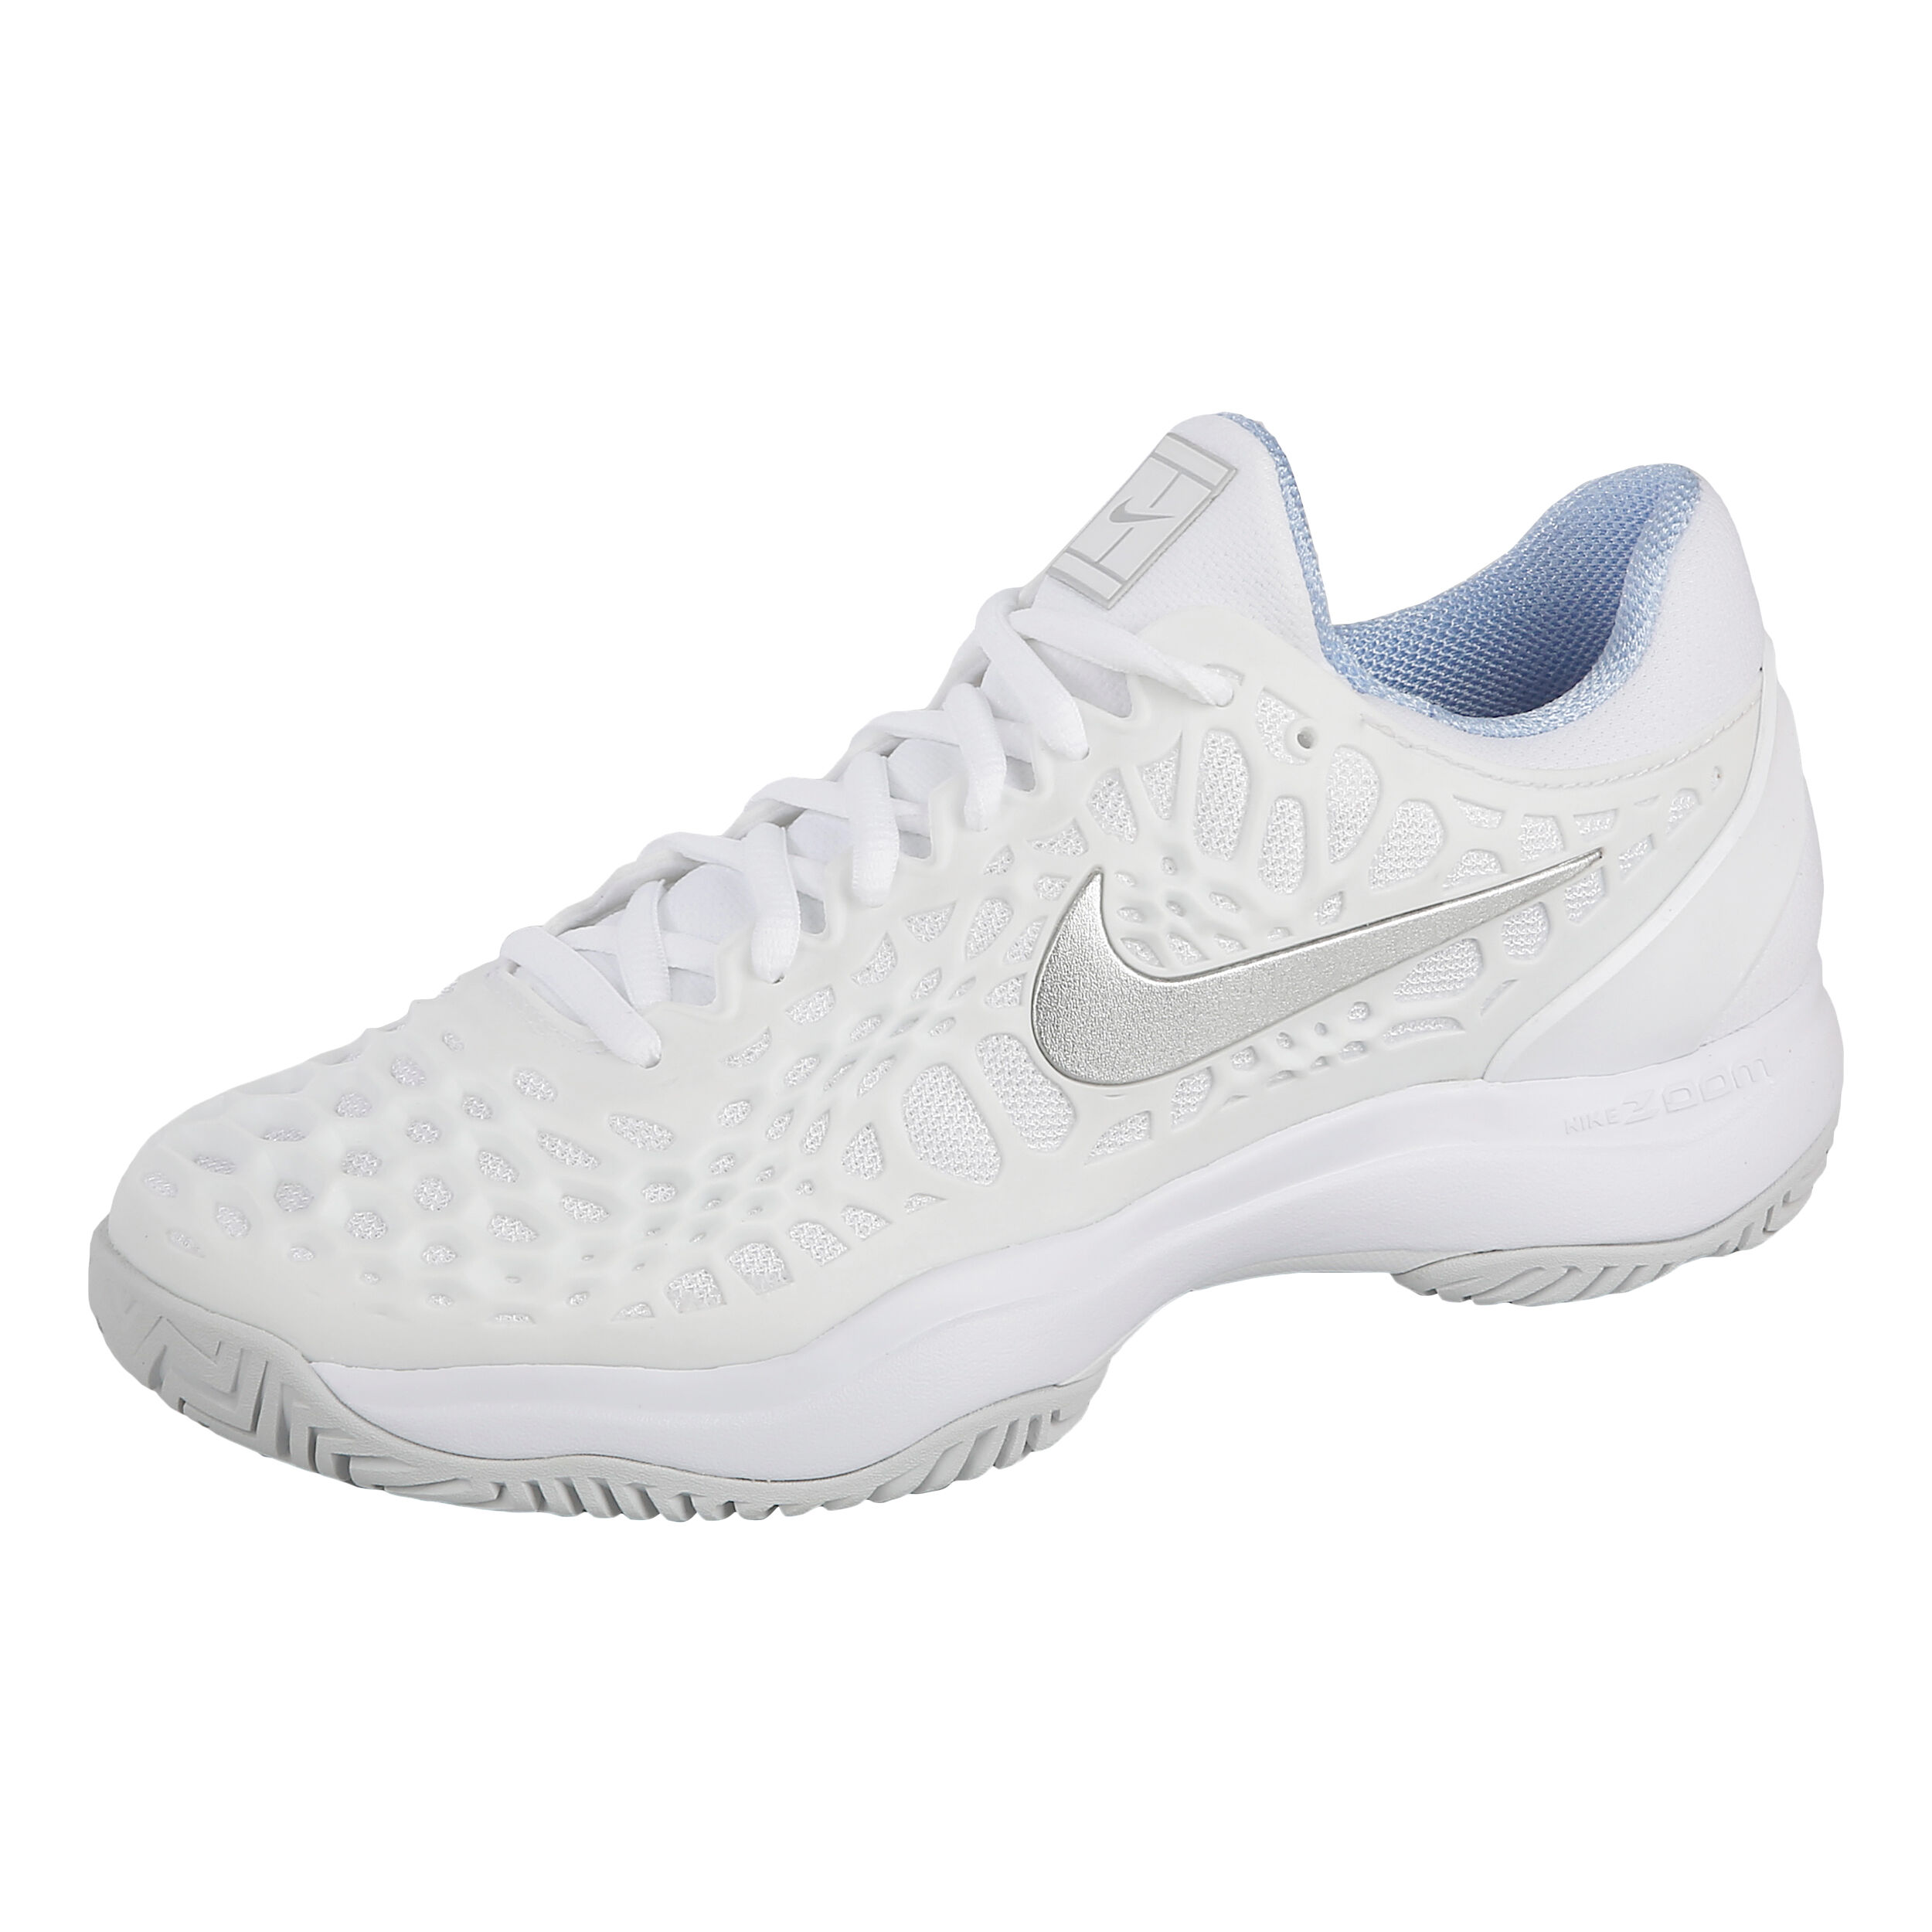 nike tennis shoes zoom cage 3